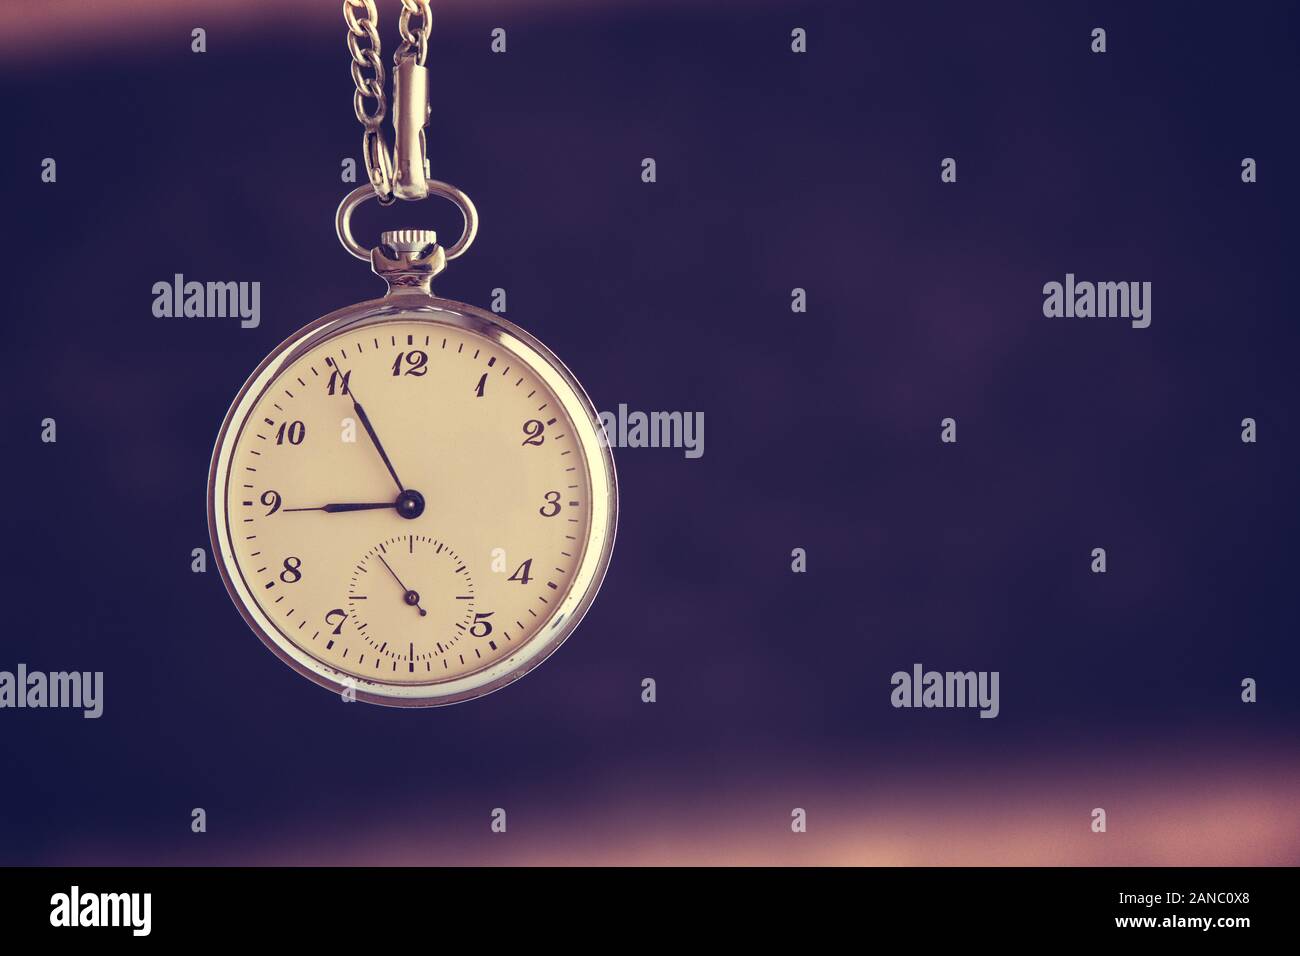 Time Passing Concept. Old Pocket Watch. Deadline, Running Out of Time and Urgency. Stock Photo